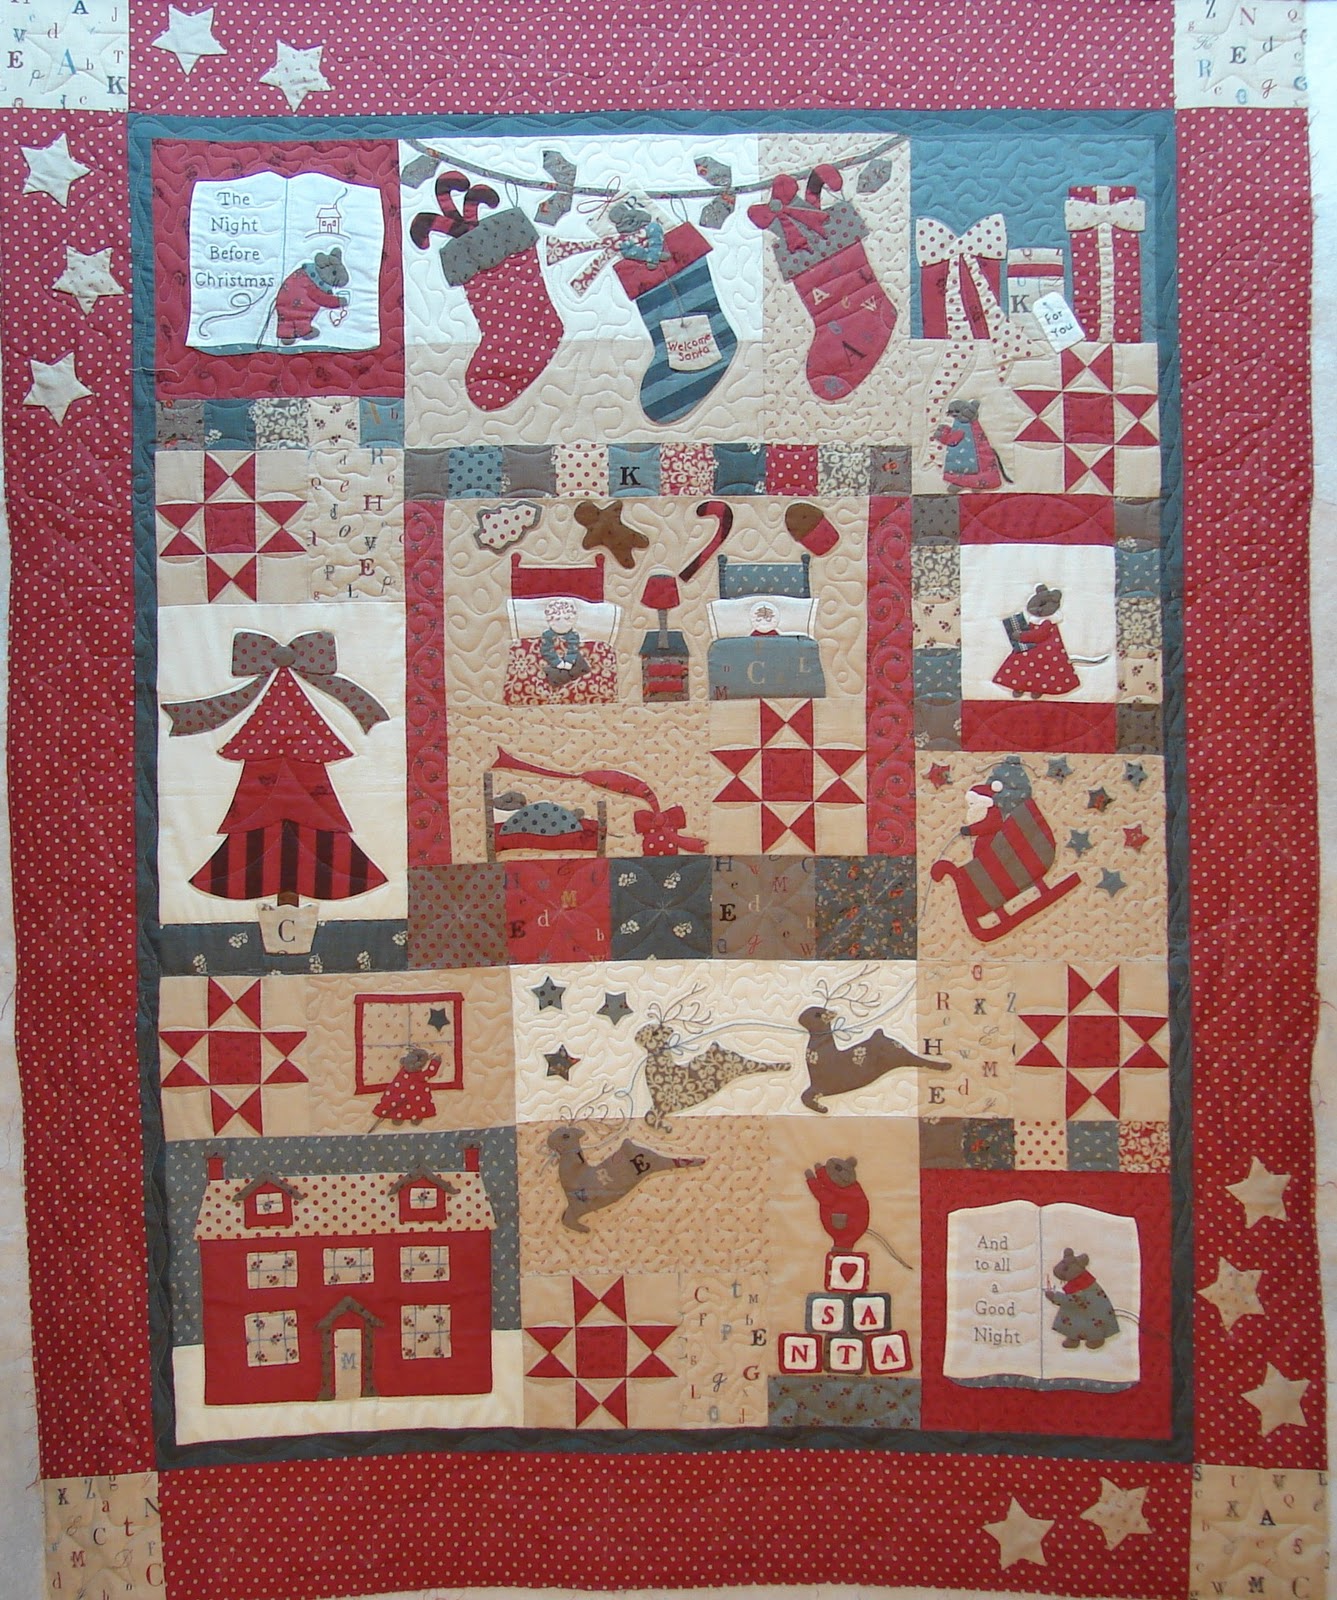 Quilt Vine: The Night Before Christmas